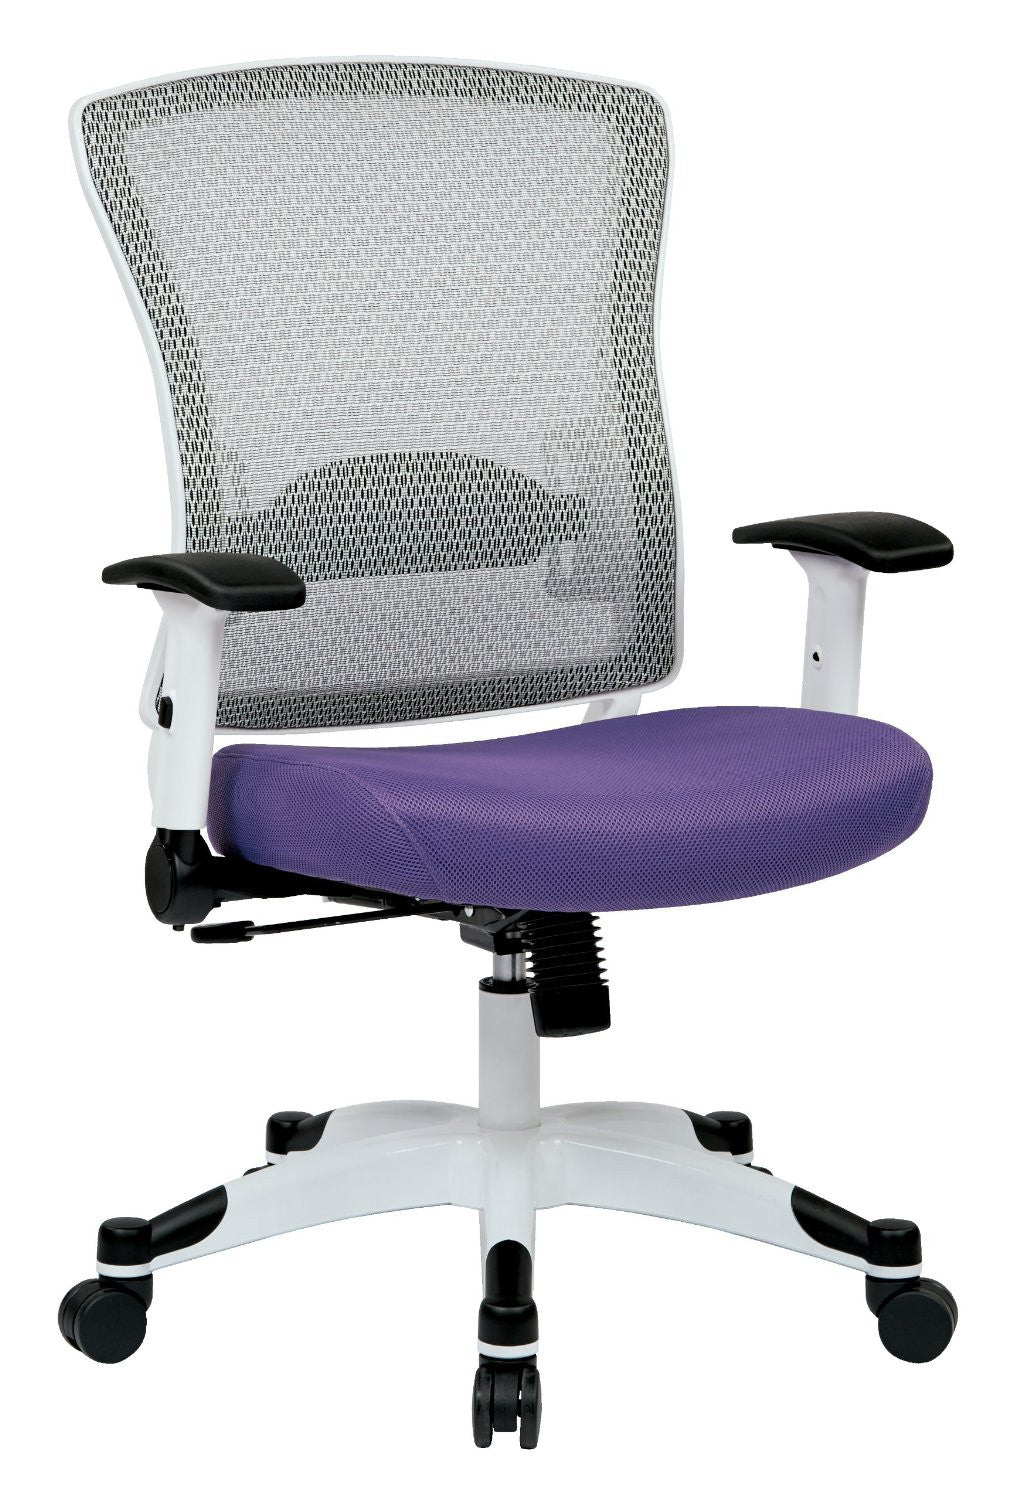 Space Seating 317w-w1c1f2w-512 White Frame Managers Chair (purple)